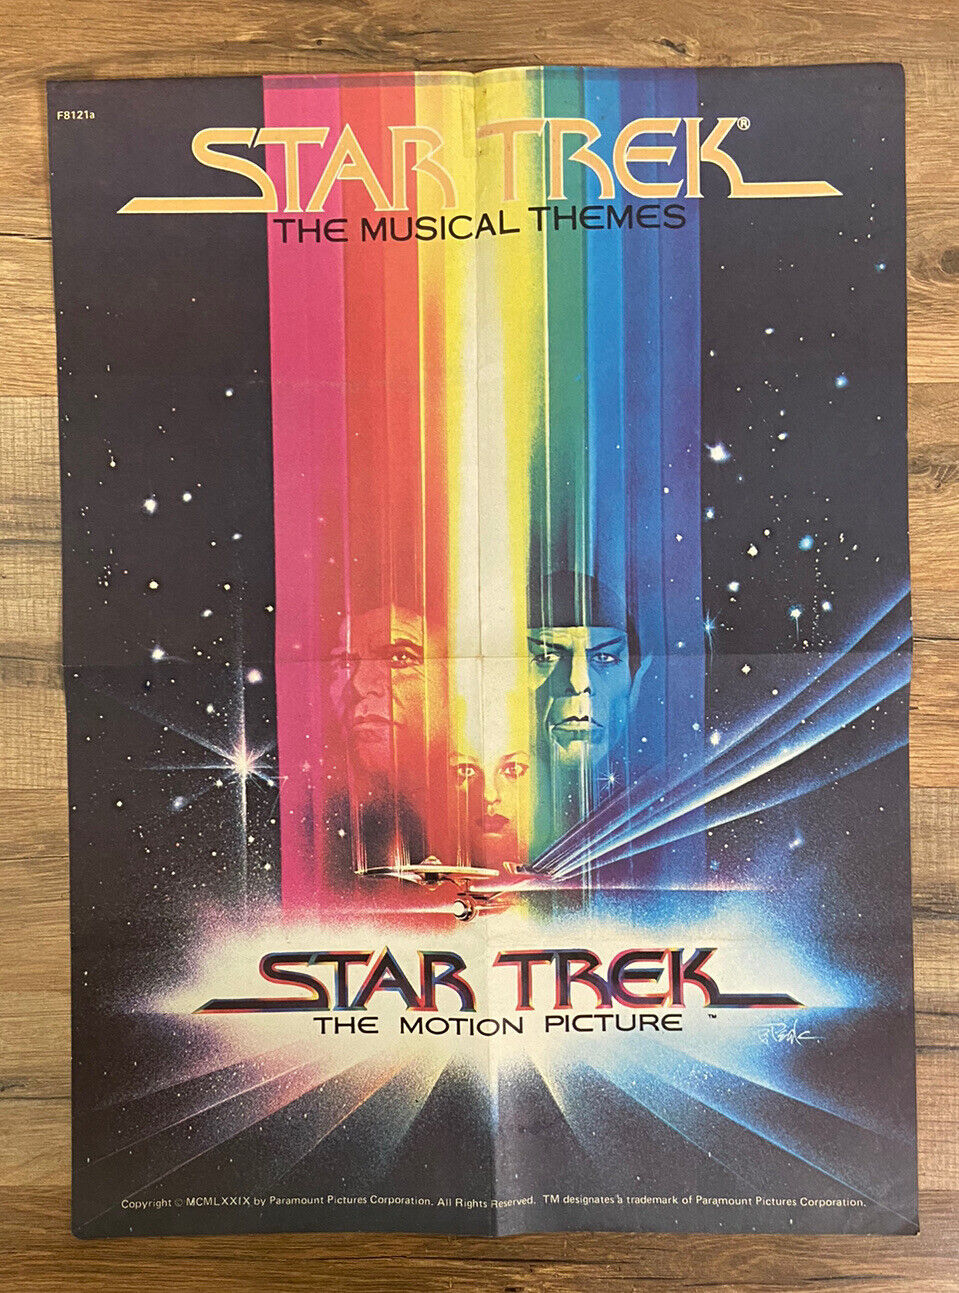 Star Trek The Musical Themes Motion Picture Paramount Poster Original VTG 22”x16